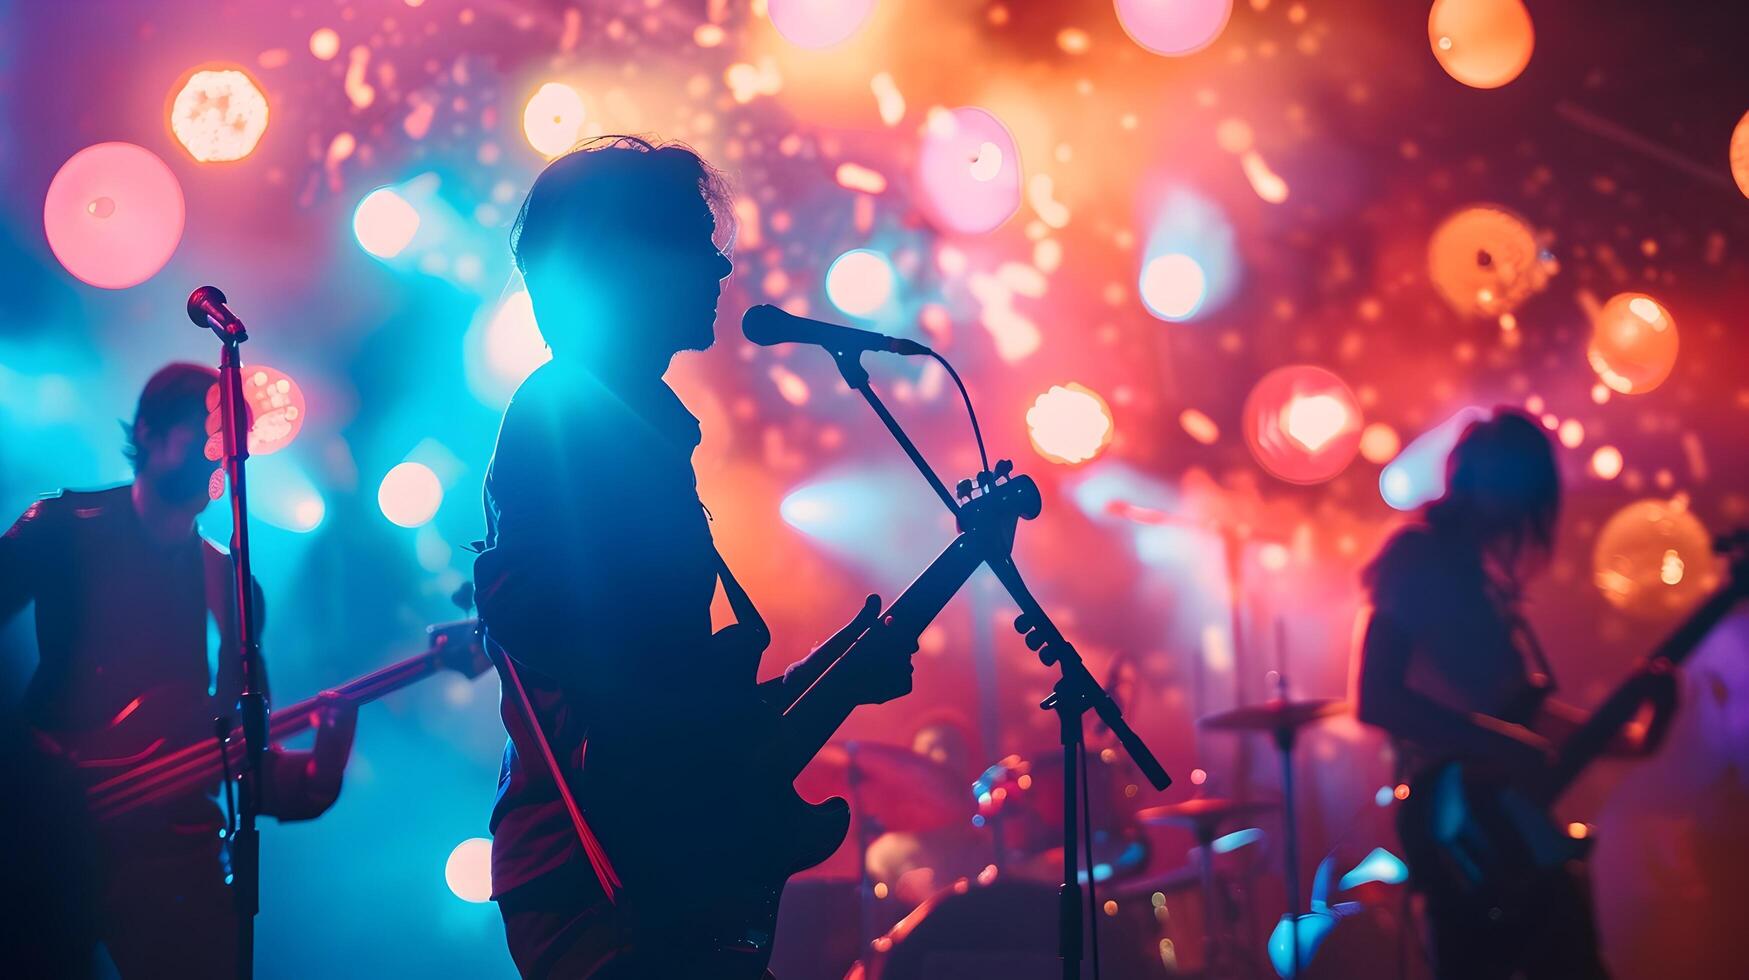 AI generated Colorful Concert Lighting with Rock Musicians in Playful Style photo